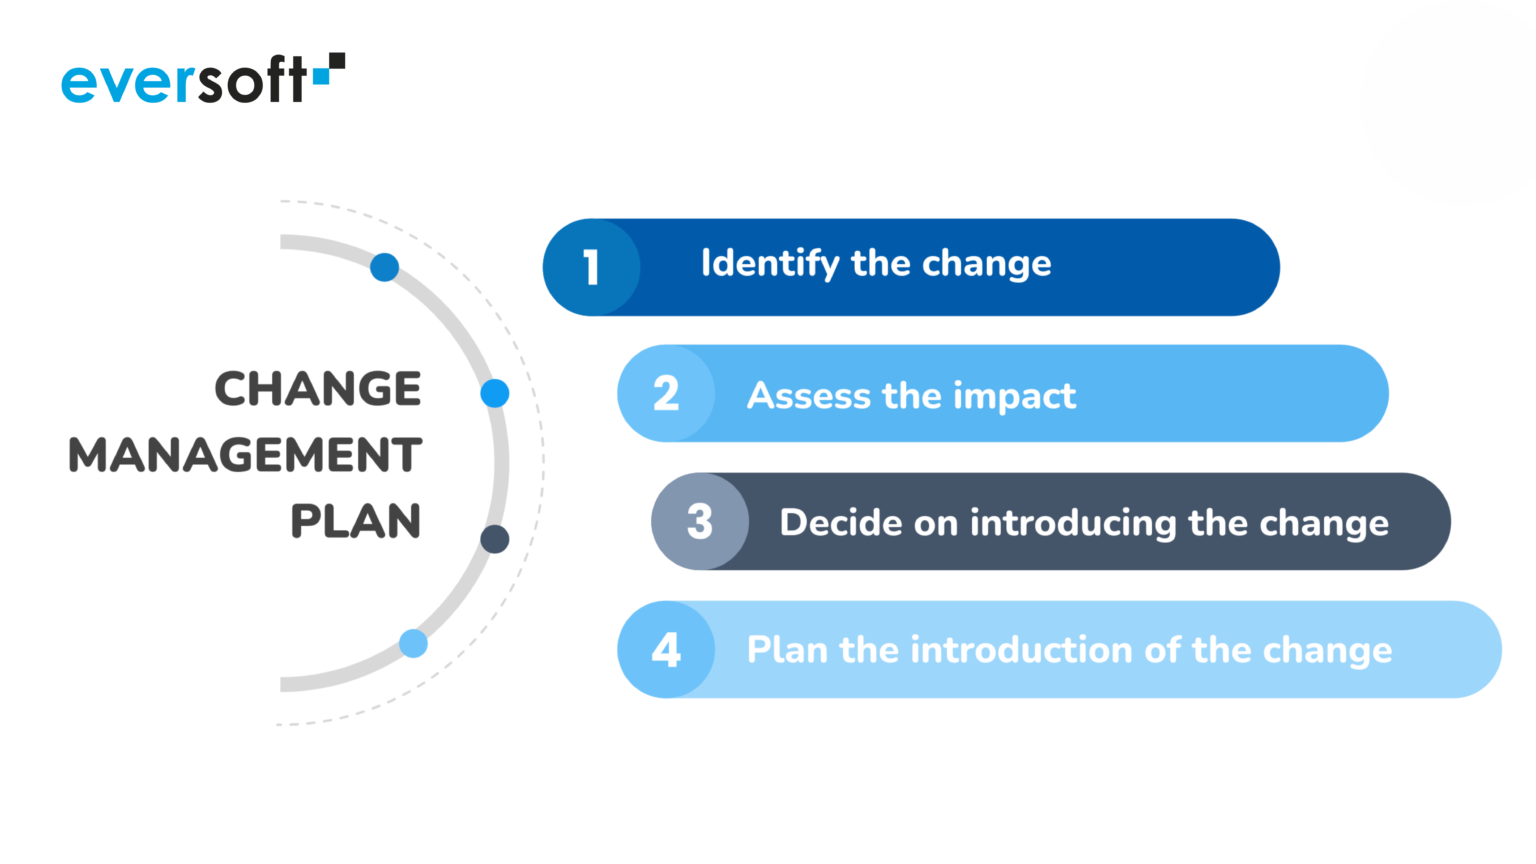 Change management process in software development projects